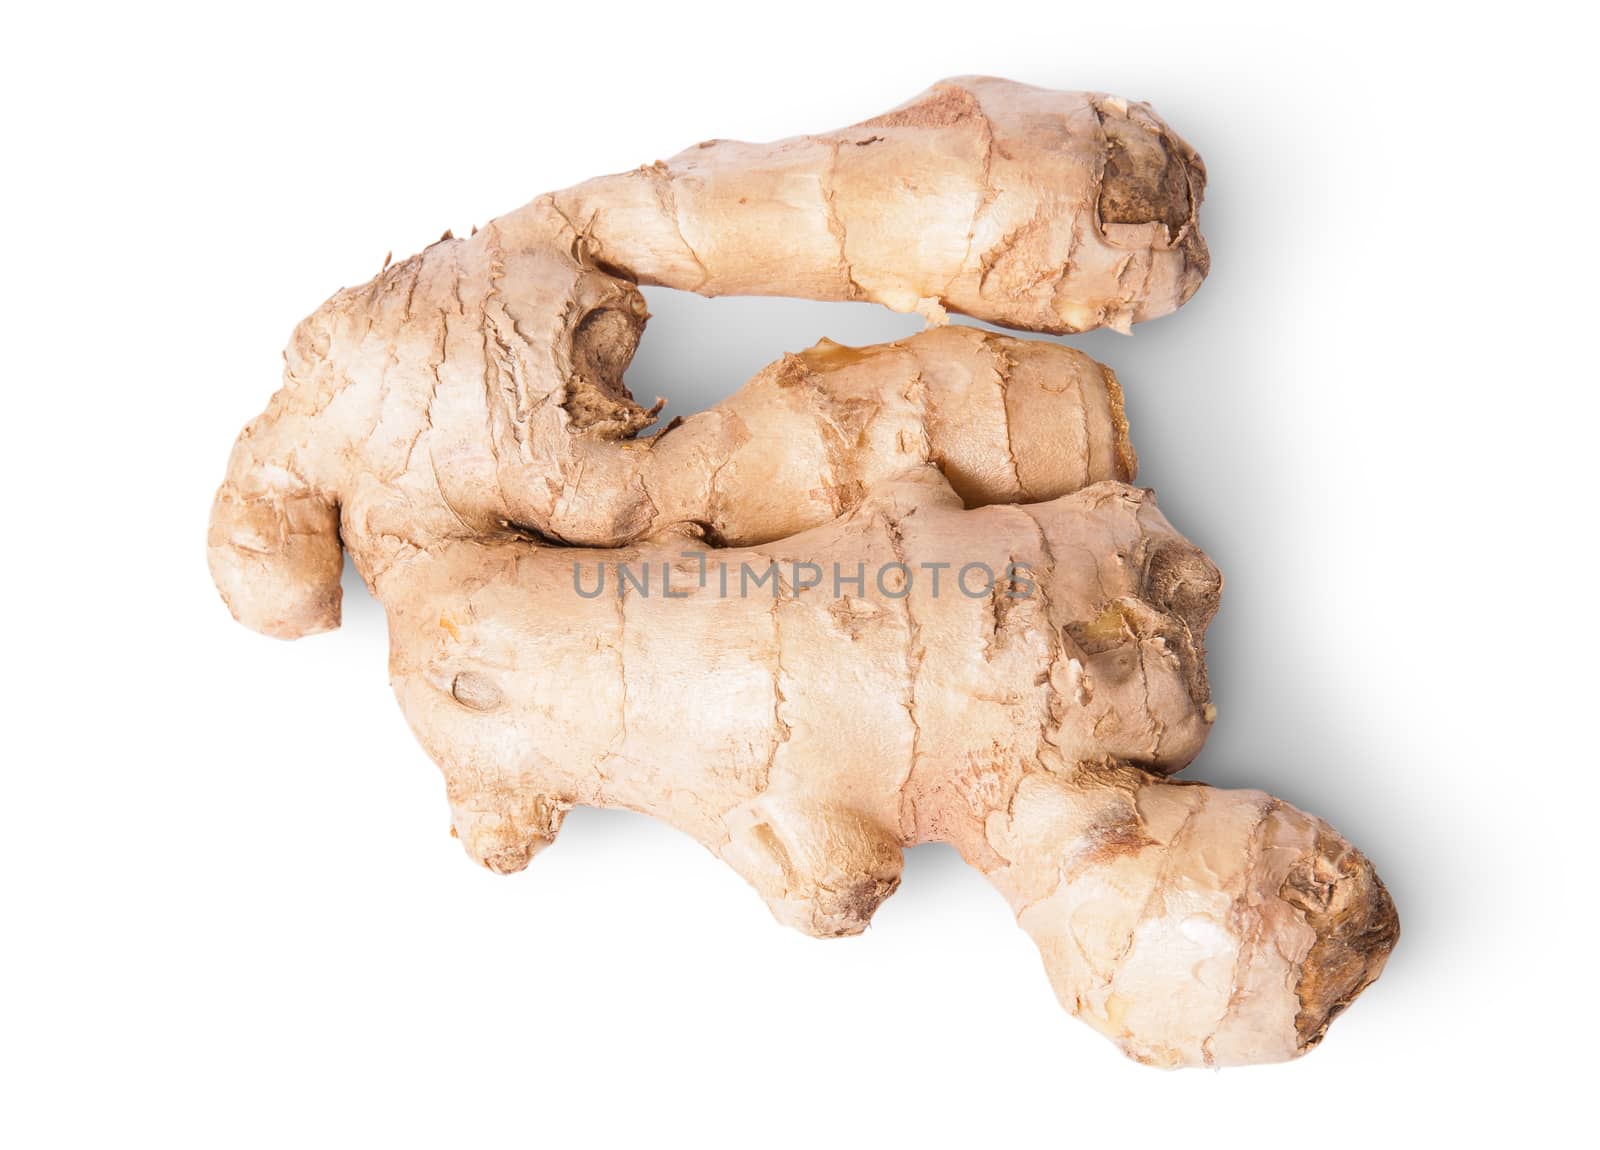 Entire ginger root top view isolated on white background